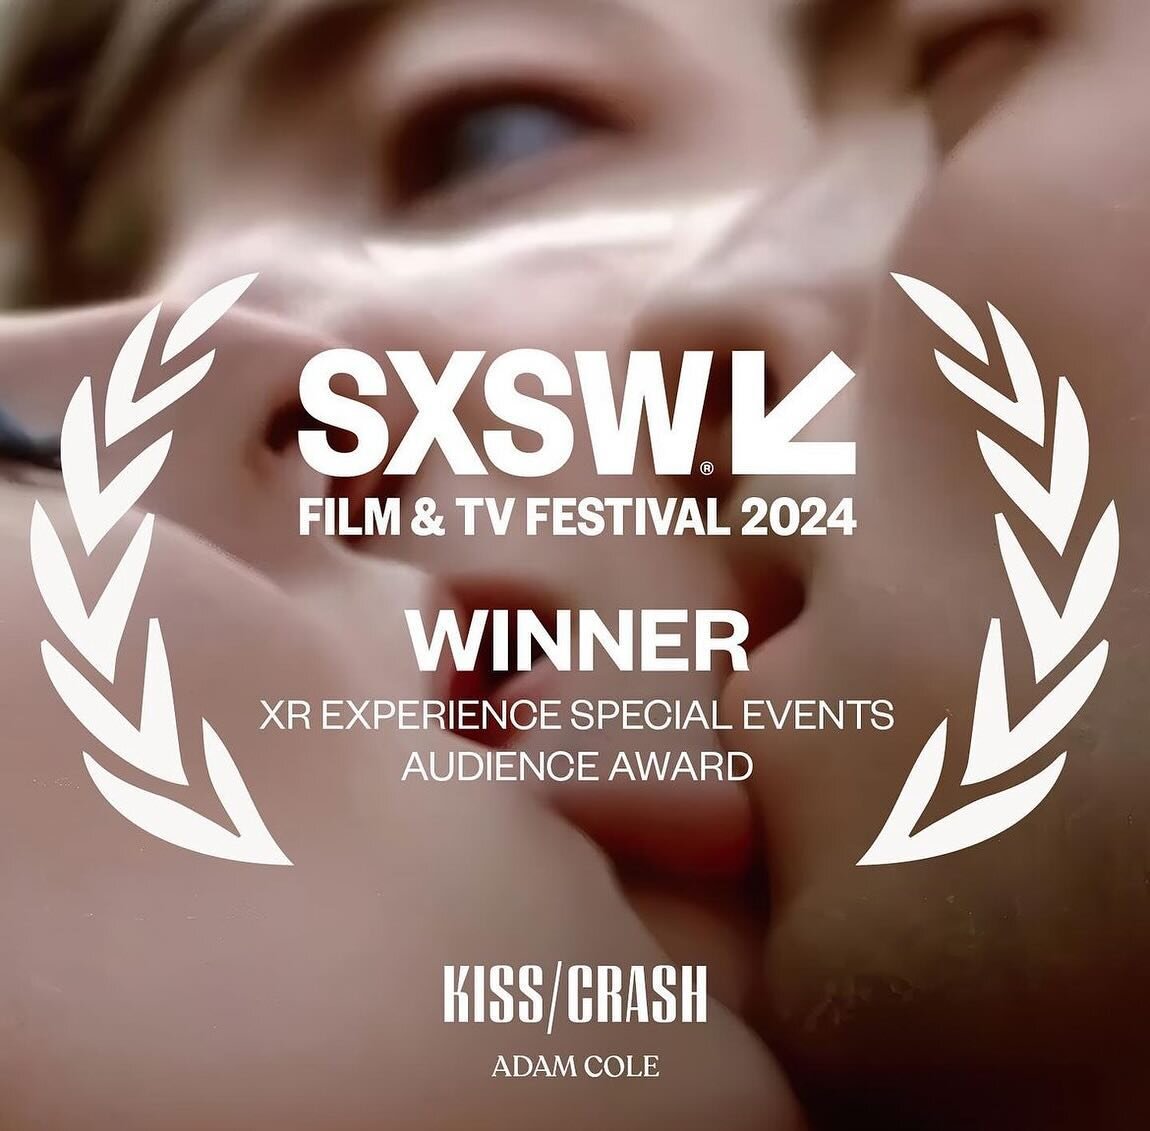 Congratulations to Future Art and Culture XR Exhibitor @adamcole.studio for winning the @sxsw Audience Award 2024 with Kiss / Crash 🍾

The installation triptych &ldquo;Kiss/Crash&rdquo; employs AI-imagery to explore themes of desire and the expandin